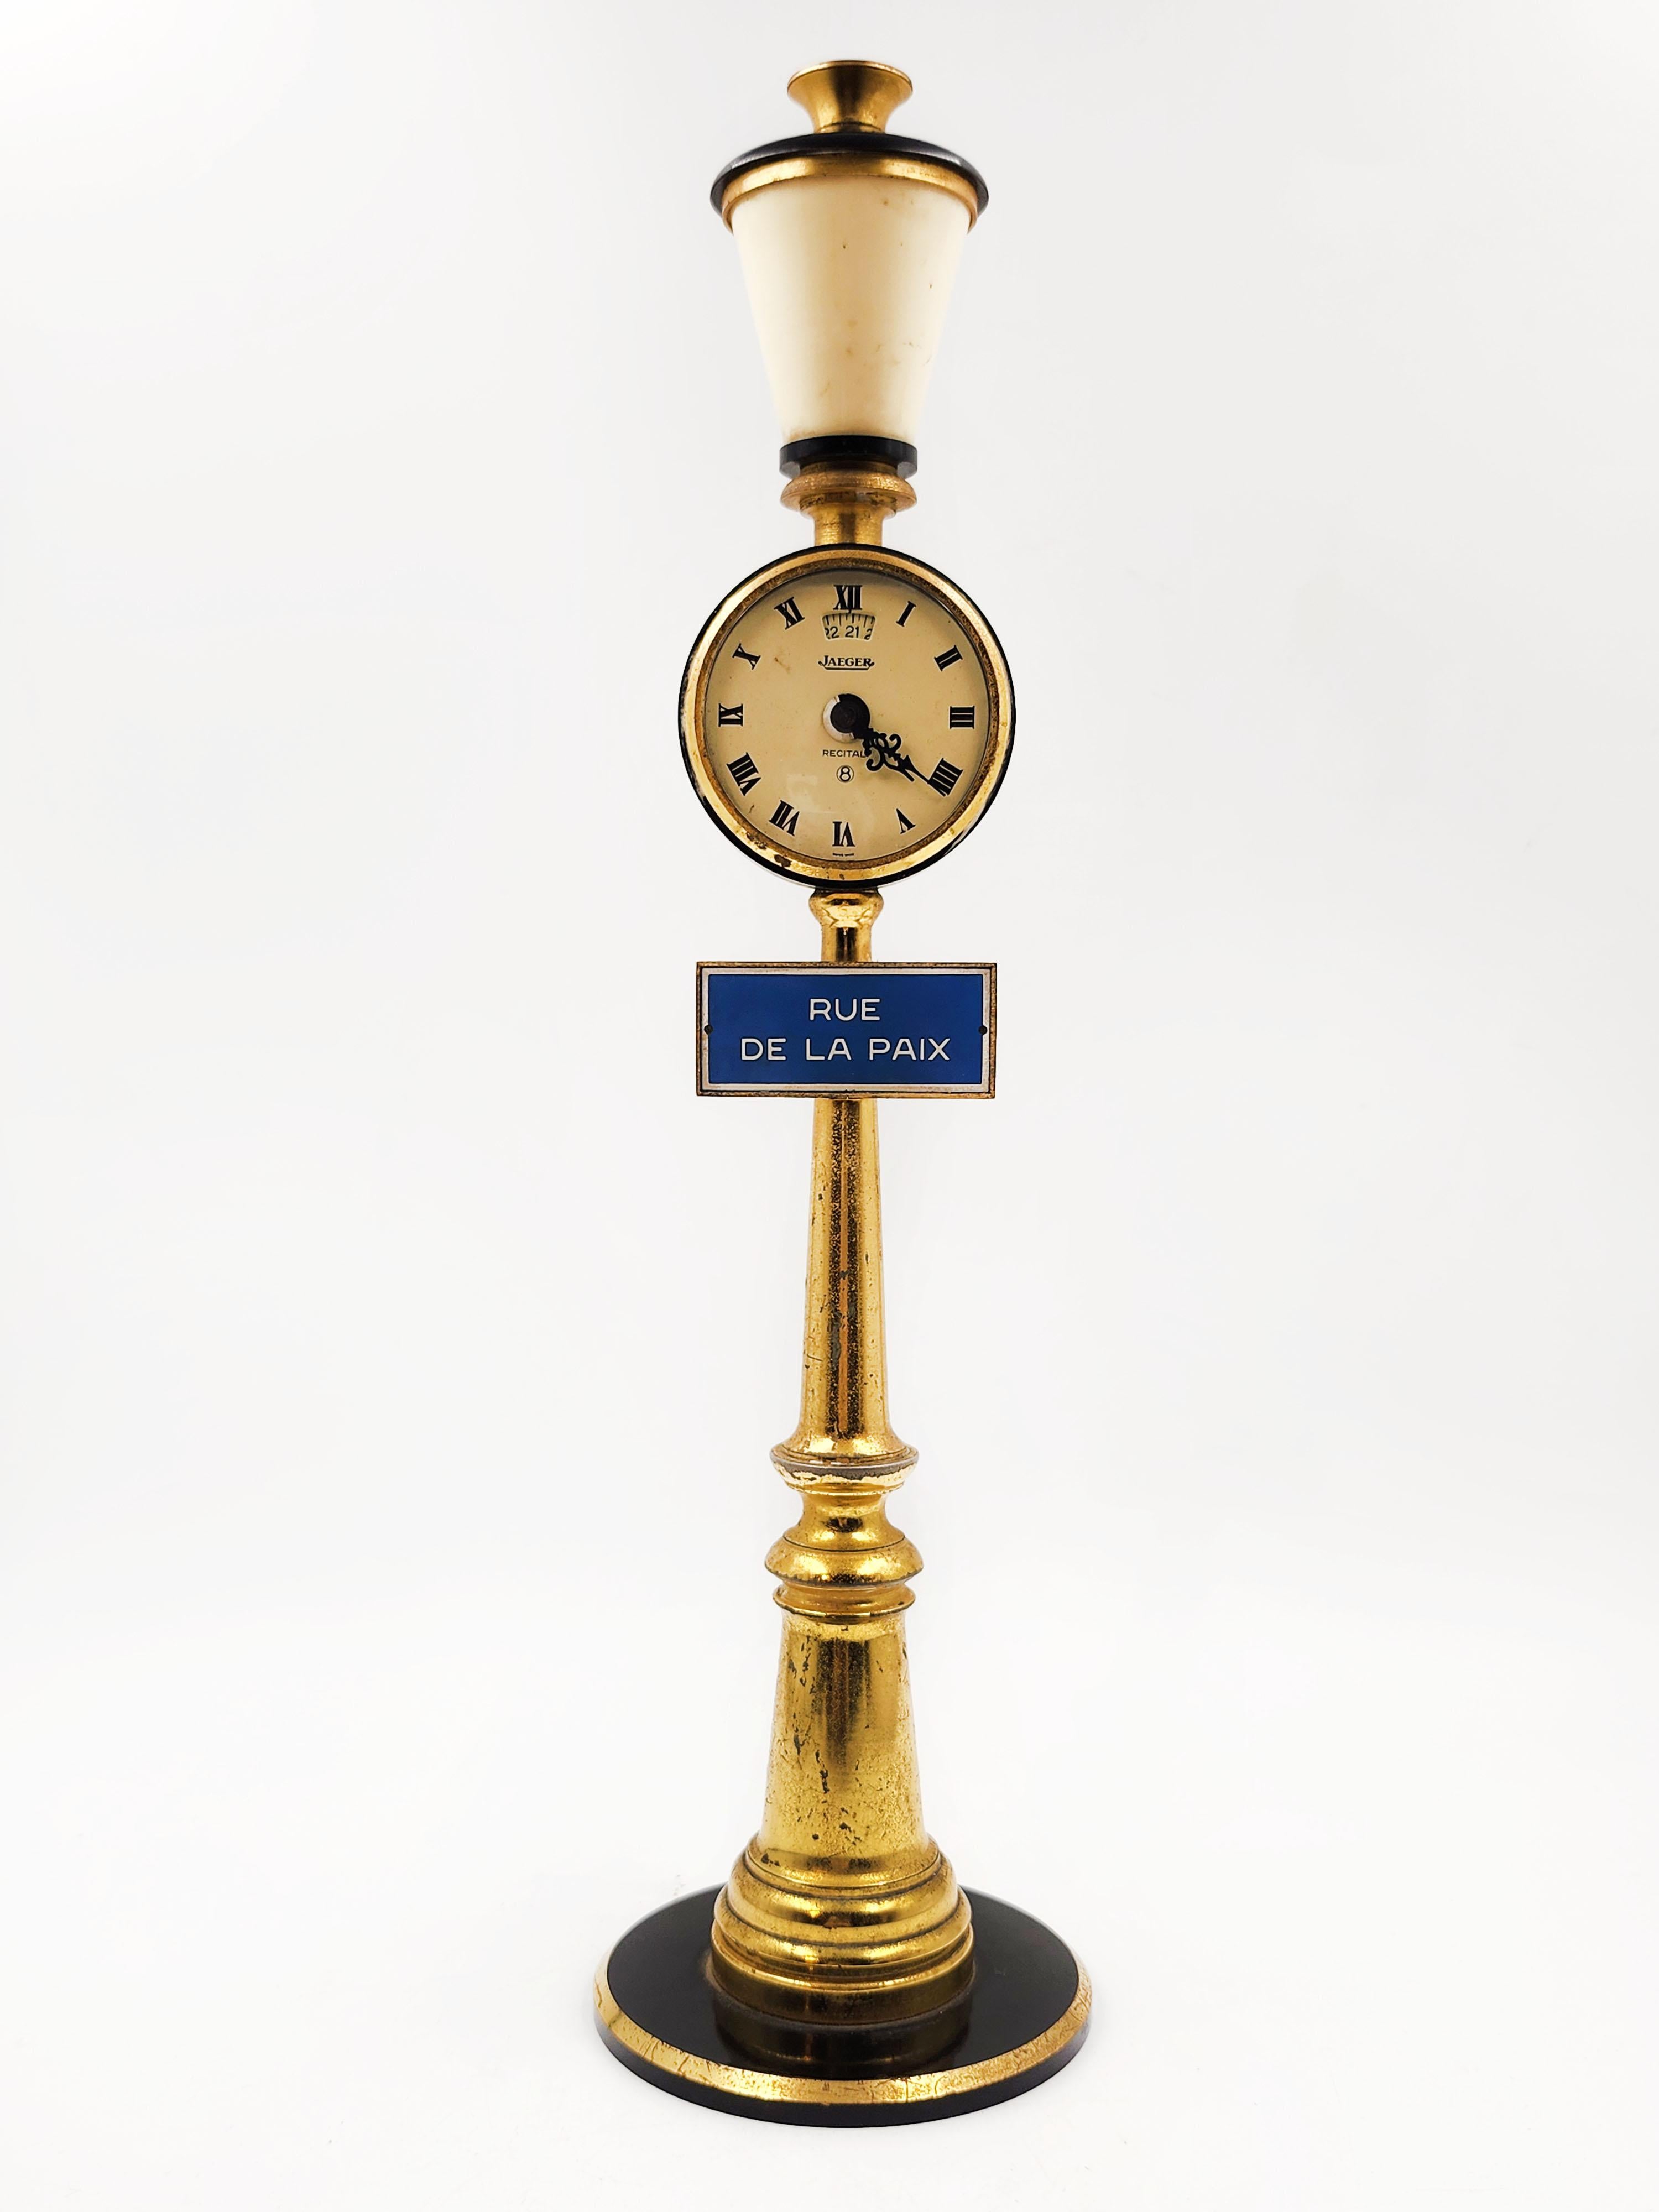 1960s Jaeger Lecoultre Mantel Clock Rue De La Paix Clock

Beautiful vintage Jaeger Le Coultre miniature lamppost clock for table or desk. It has been tested and works.

It has a straight elevator, monometallic balance, jeweled lever movement, silver